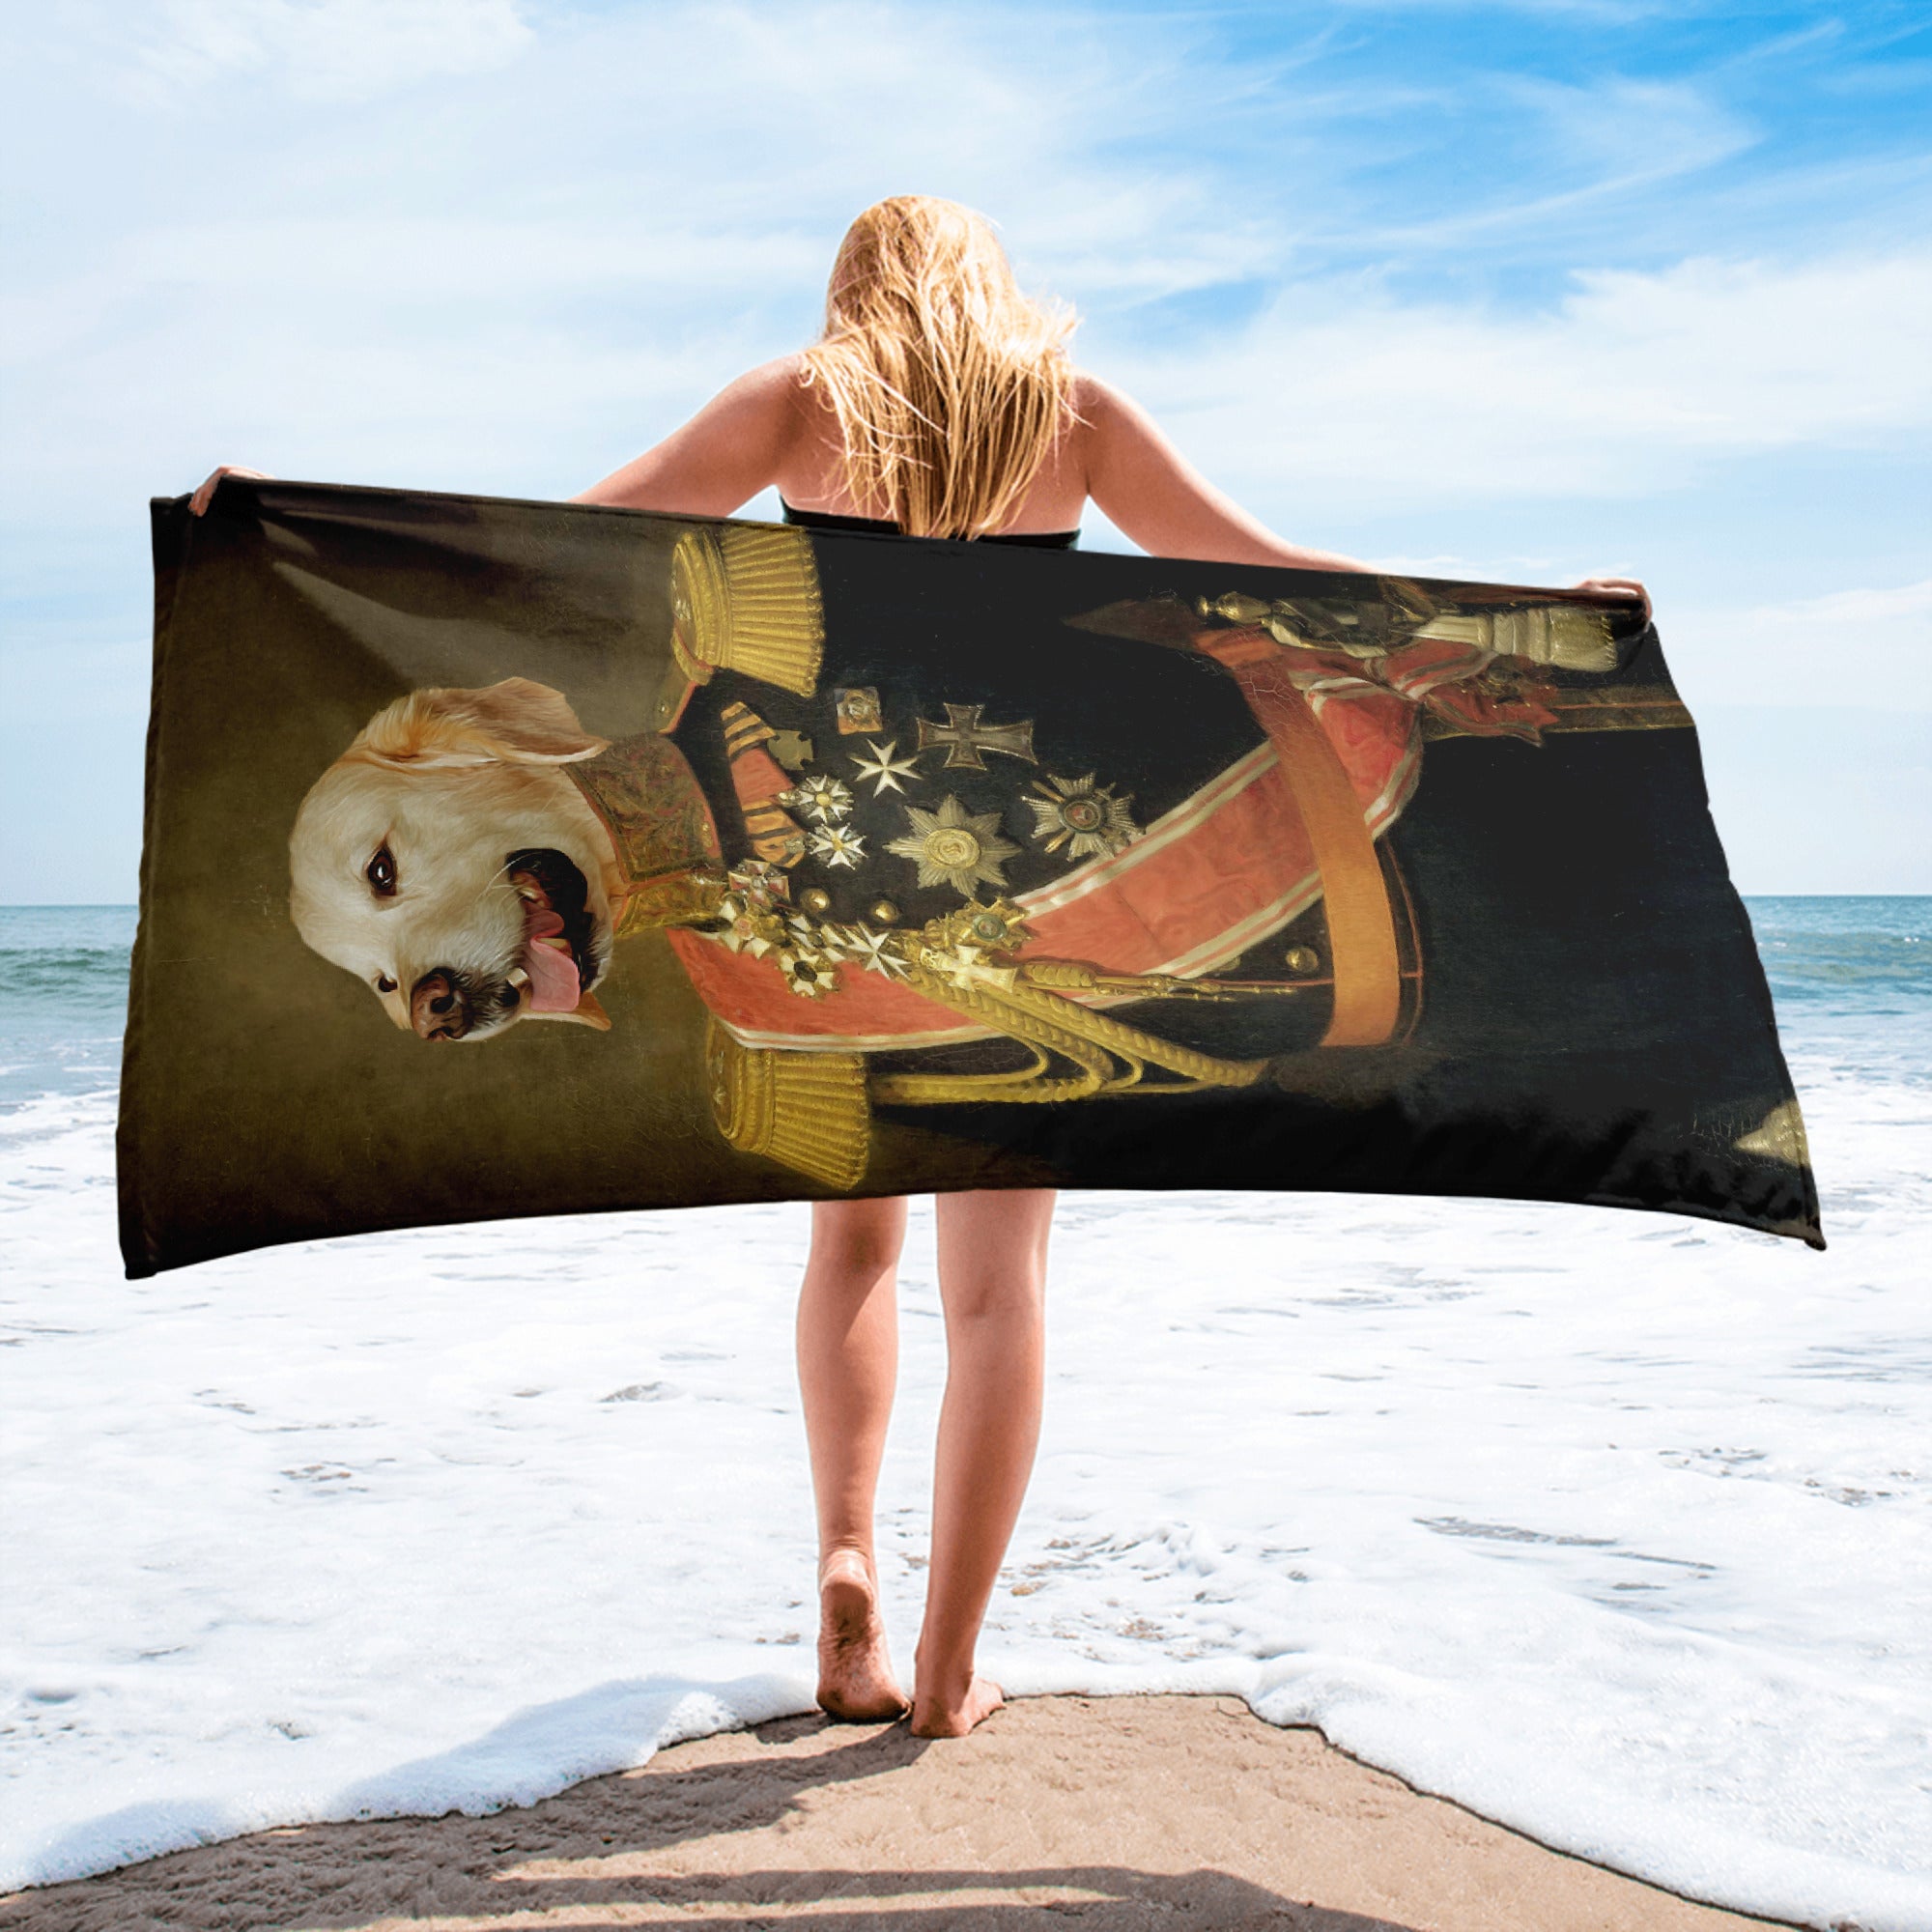 Funny Old Style Portrait Of Golden Retriever in Military Uniform - Beach Towel